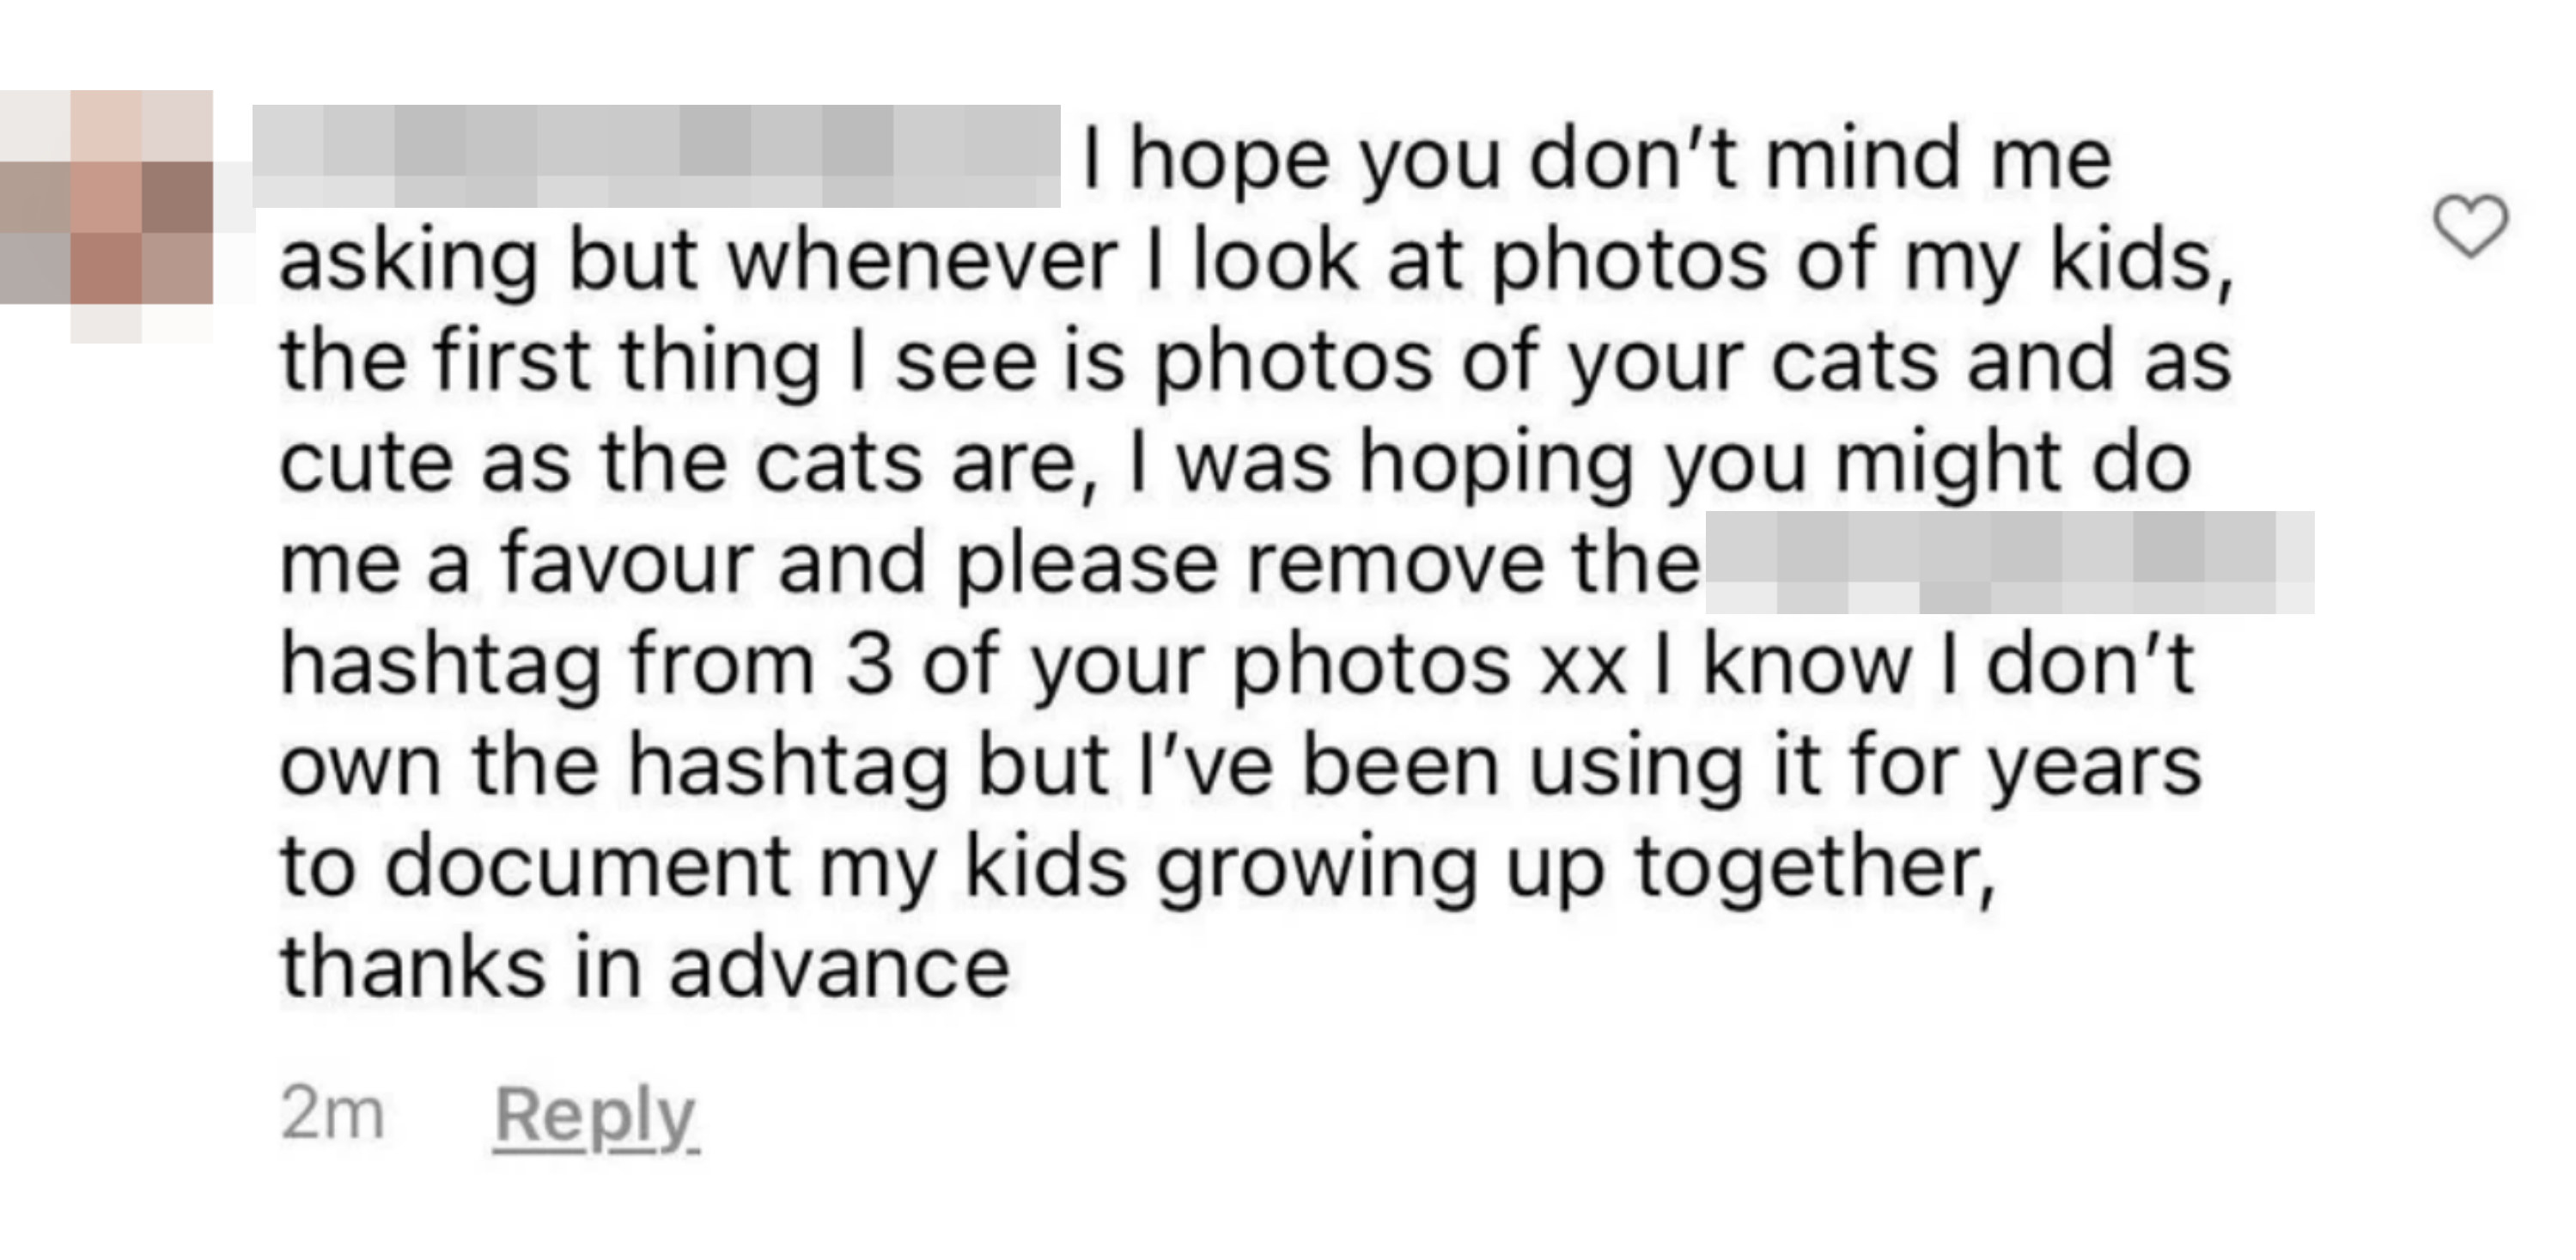 Person asking someone to stop using a hashtag for their cat photos because they&#x27;ve been using it for years for their kids and don&#x27;t want to see the other person&#x27;s cat photos